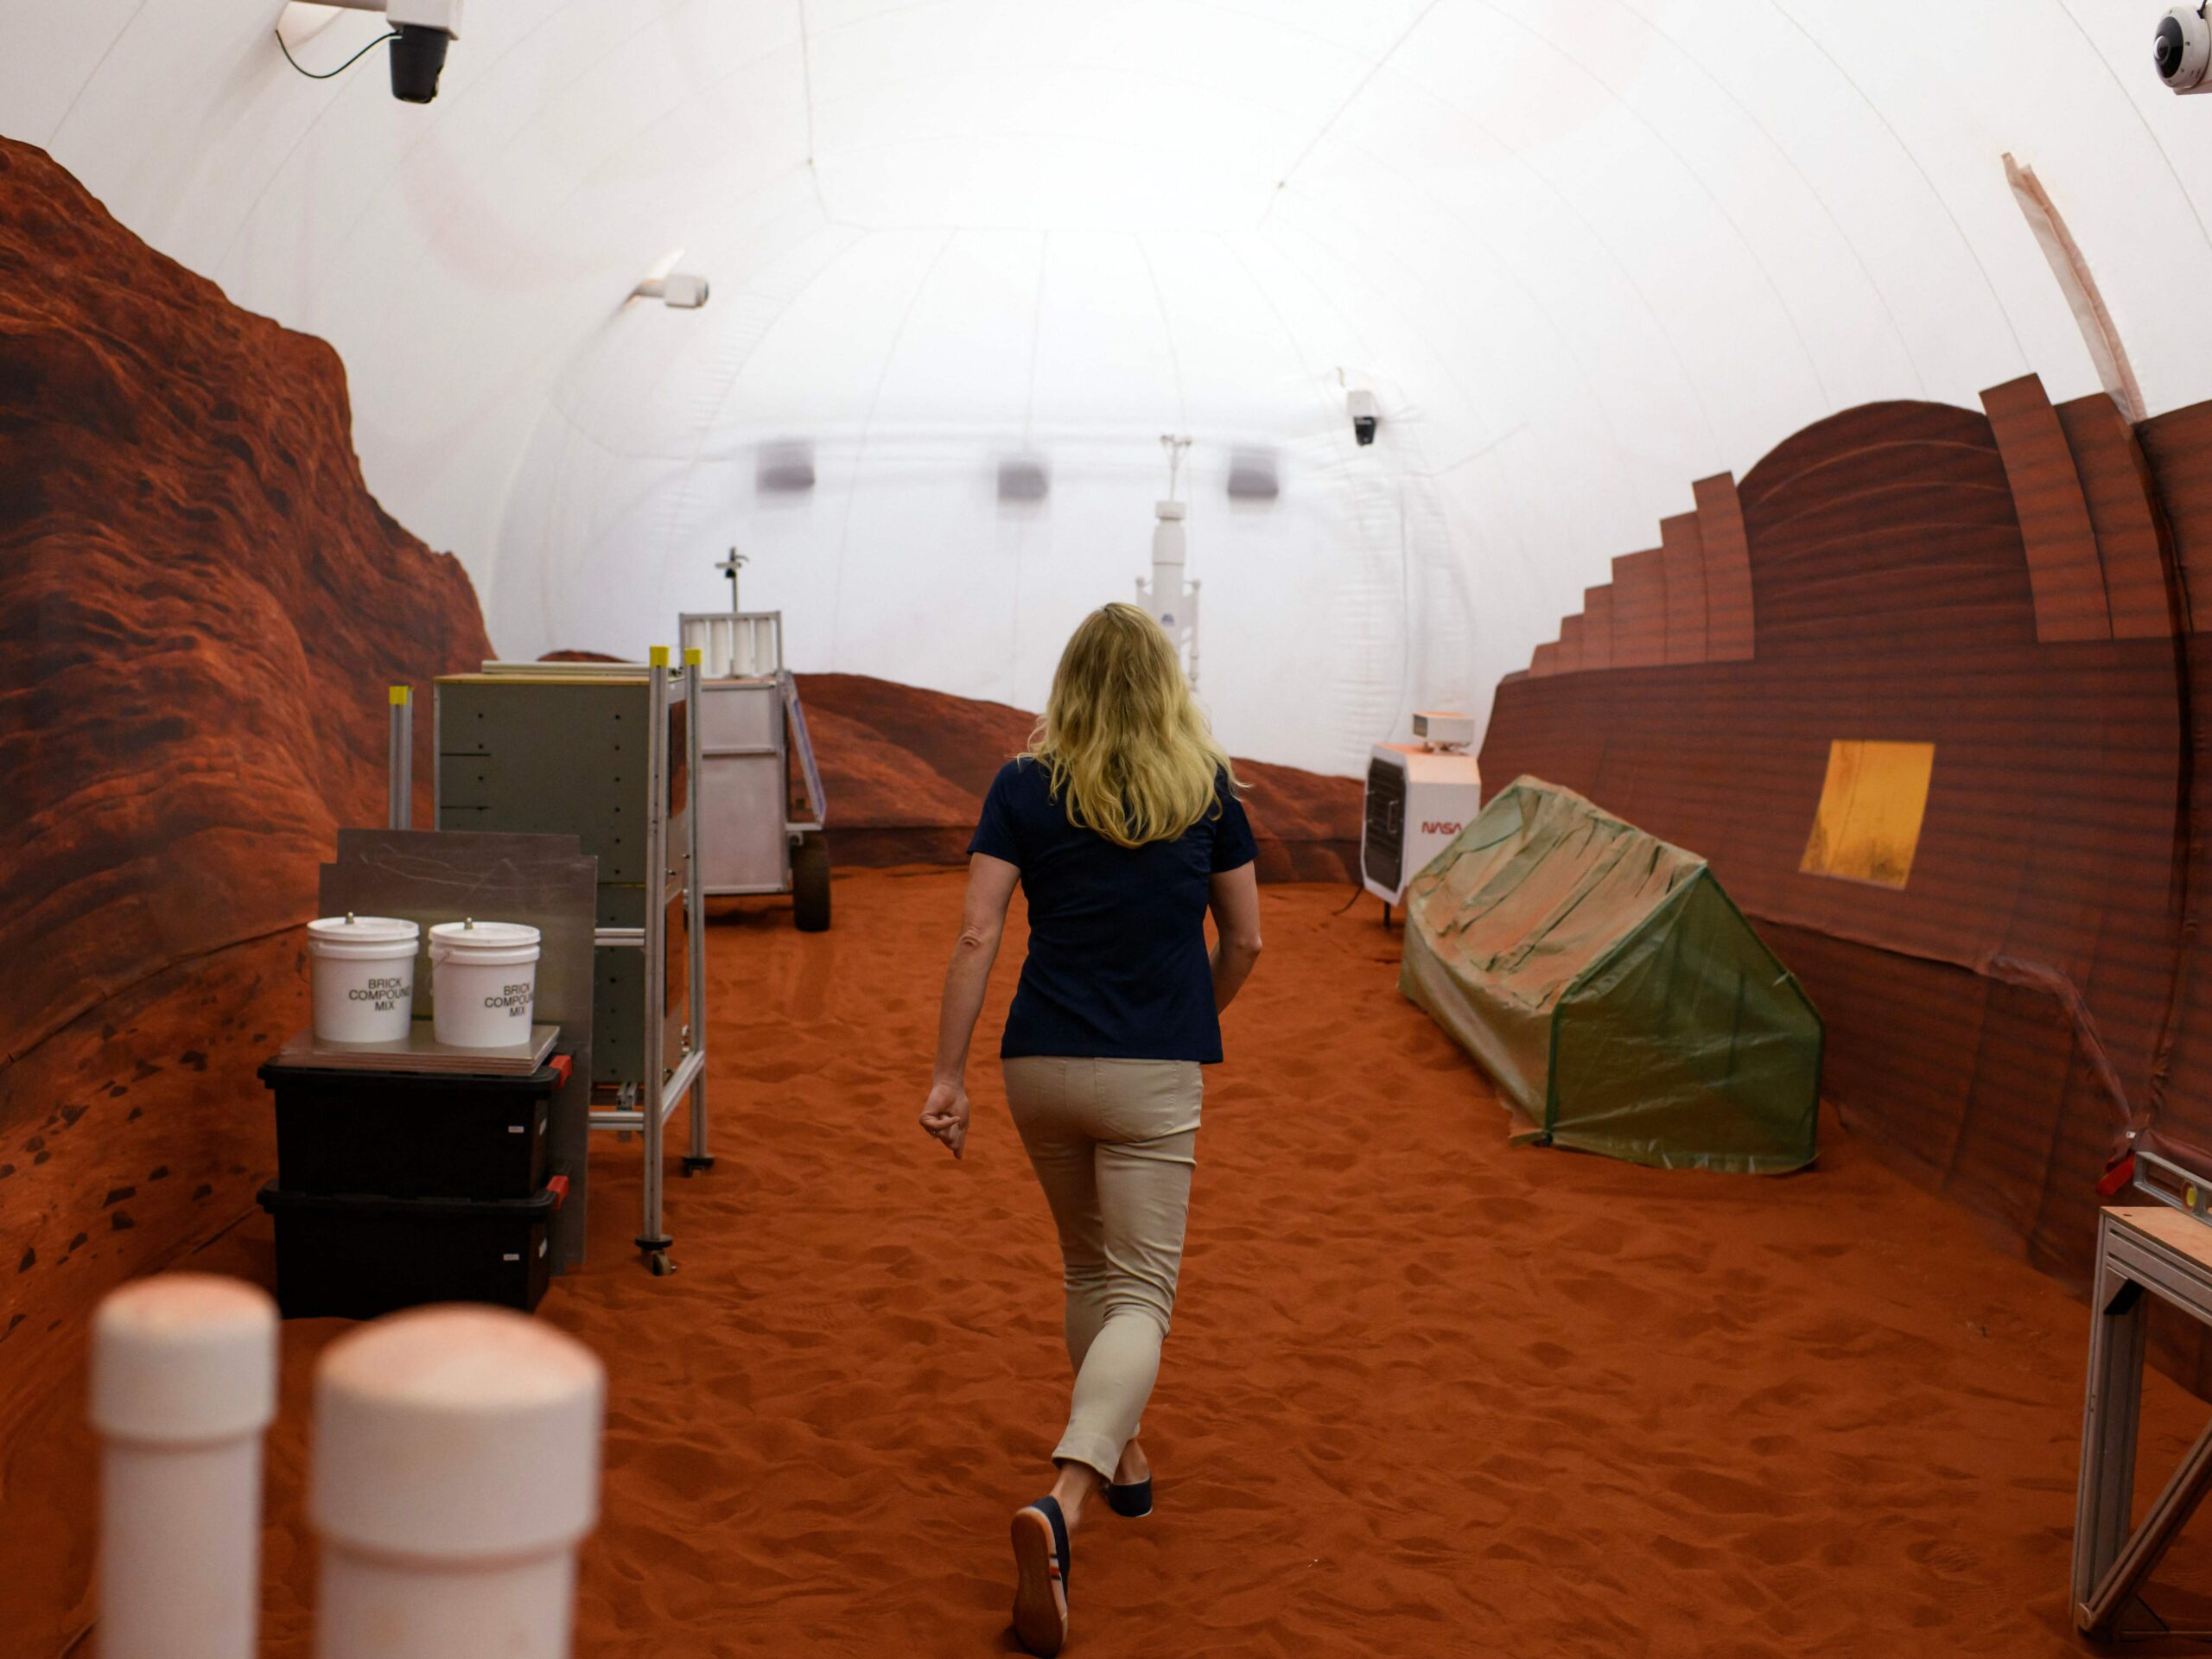 Why NASA wants human guinea pigs to test out Martian living